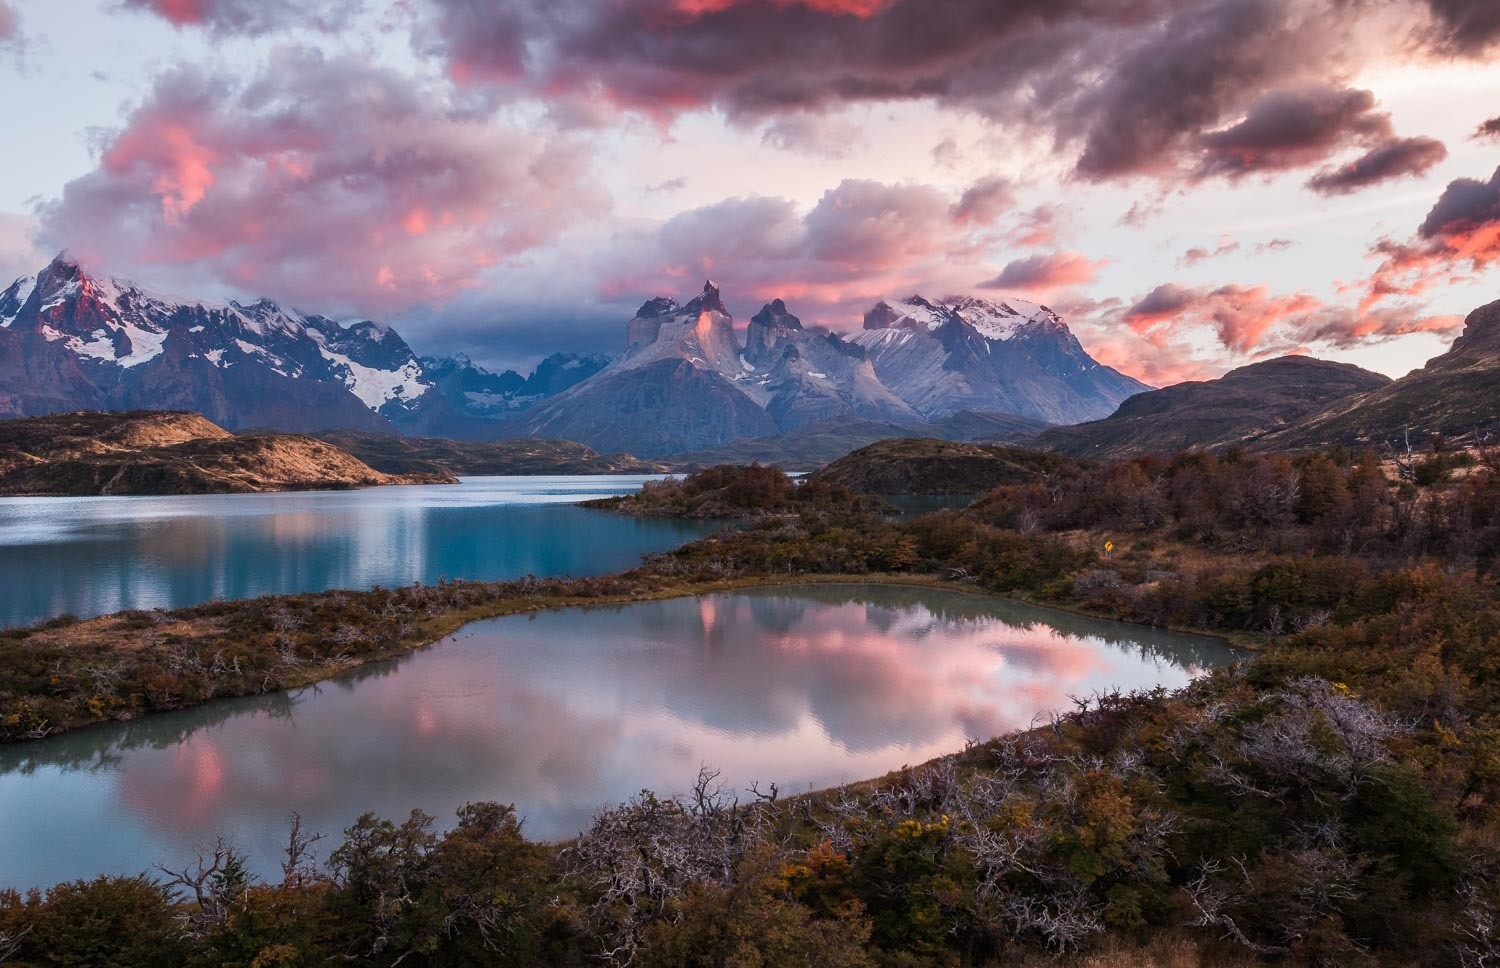 General 1500x968 nature landscape photography sunrise mountains lake shrubs fall snowy peak clouds sunlight Torres del Paine Chile national park South America Patagonia